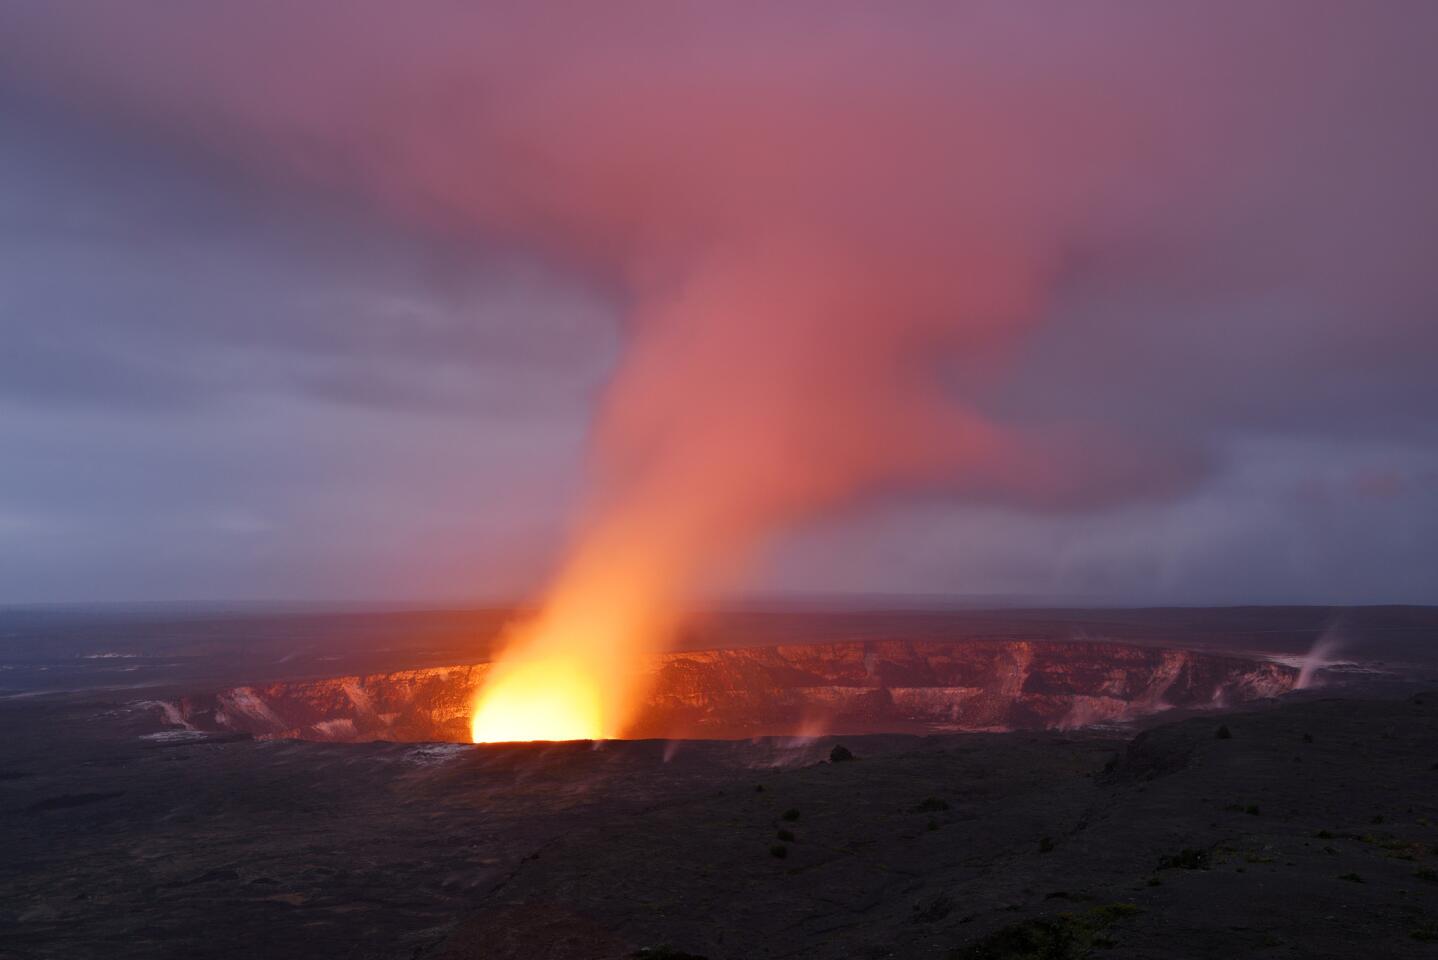 Volcanoes National Park on Hawaii Island is always a big draw. Take full advantage of the park by driving up Mauna Loa Road for a panoramic lookout view.